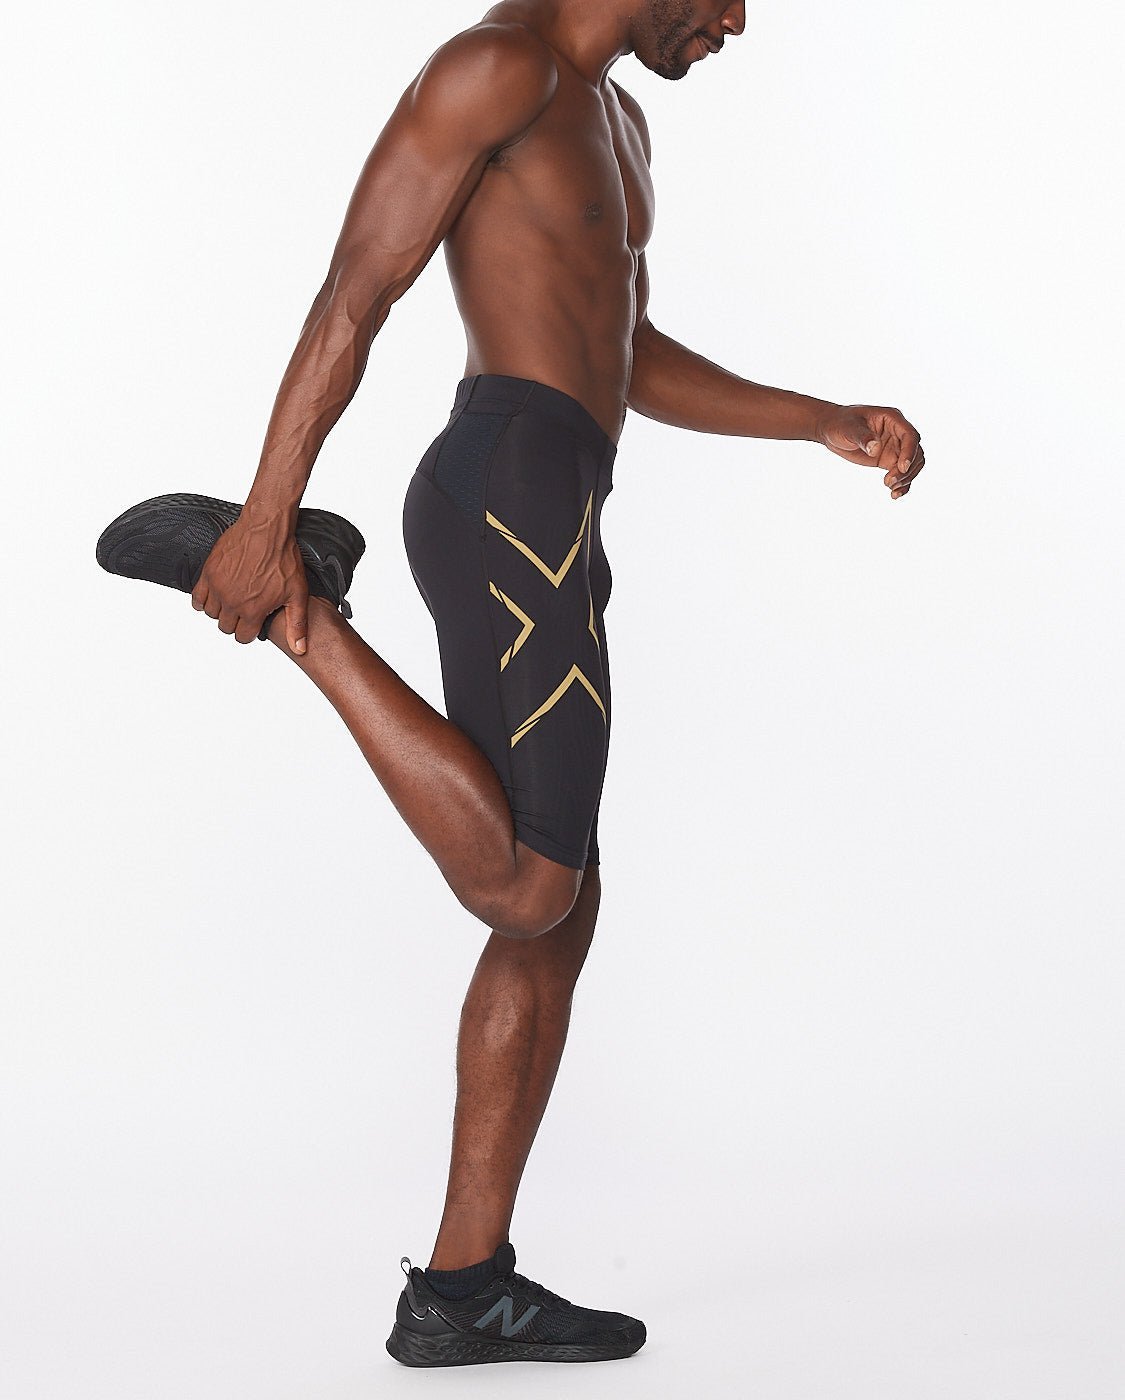 2XU South Africa - Men's Light Speed Compression Shorts - Black/Gold Reflective